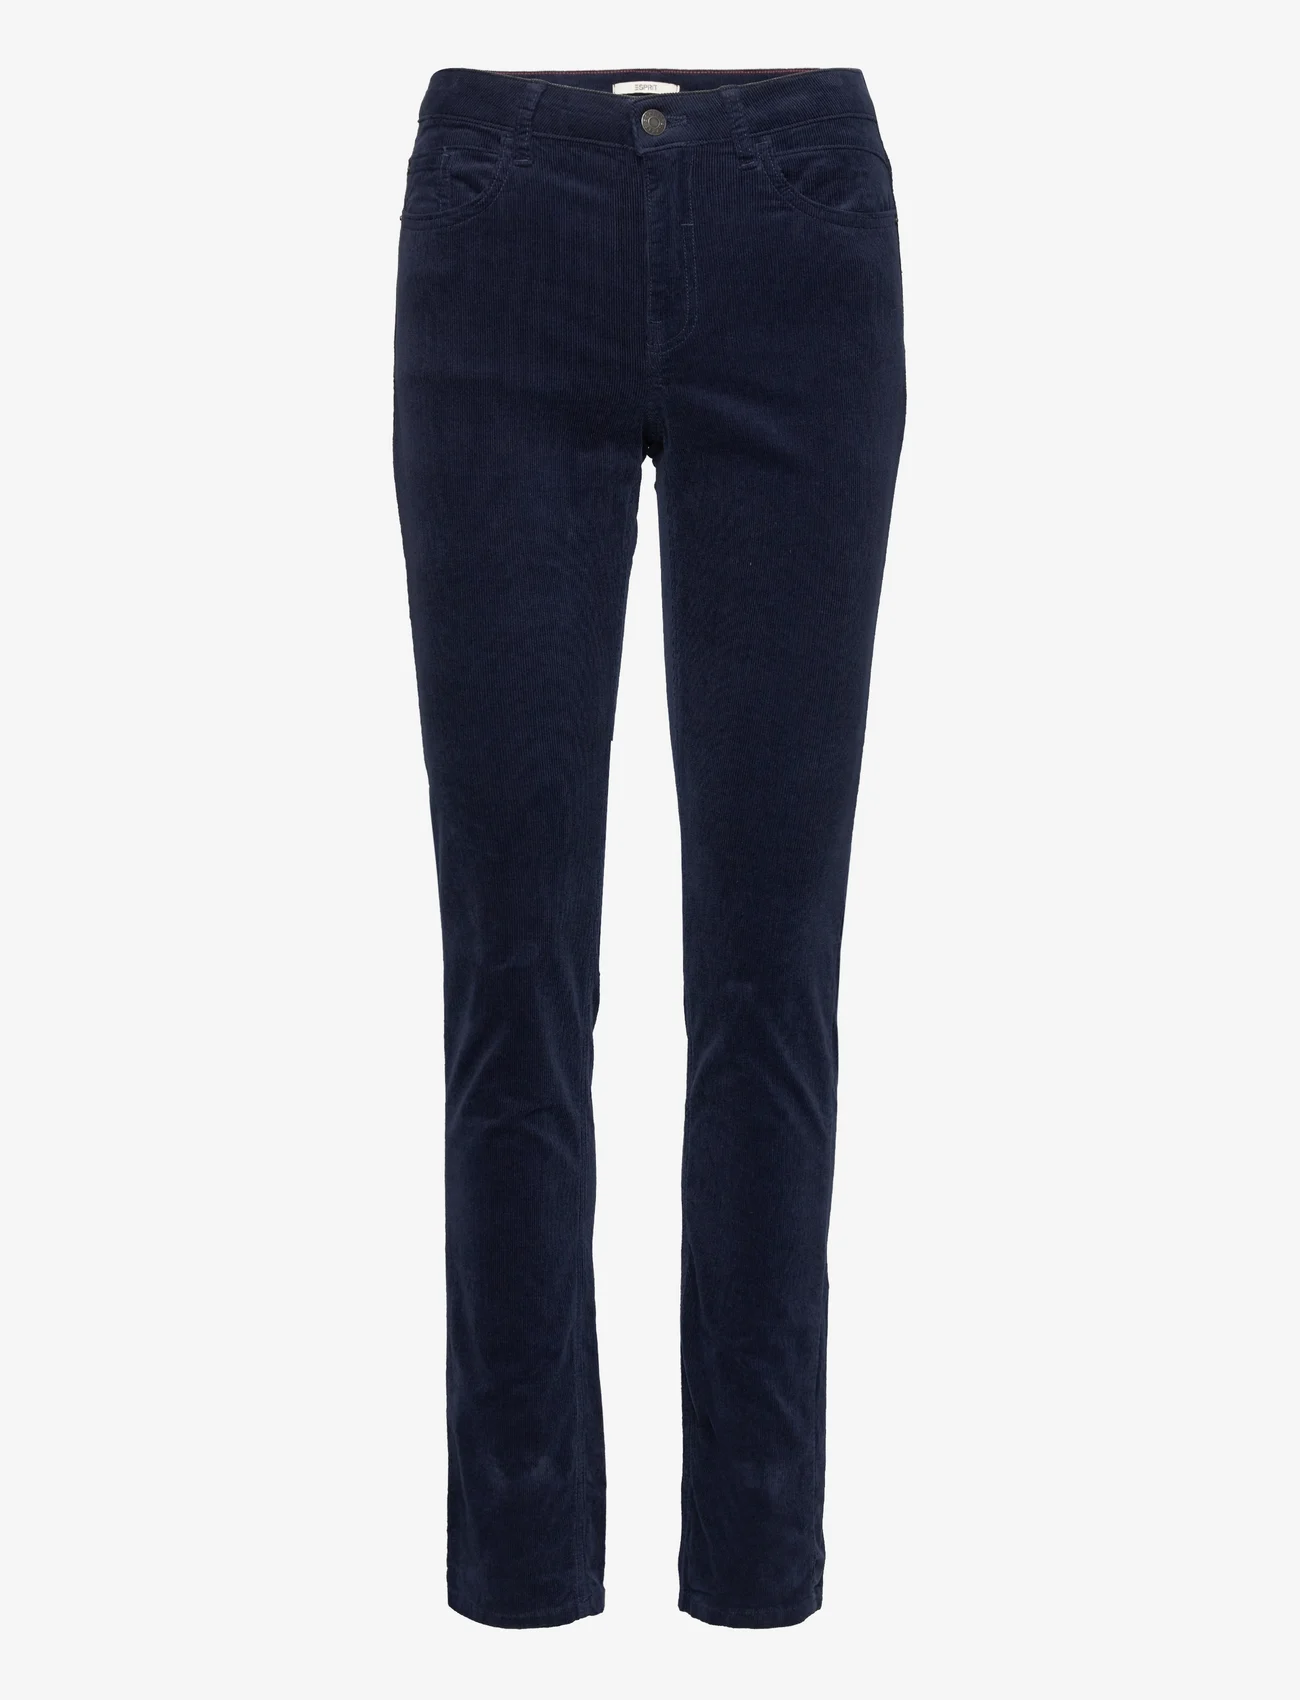 Esprit Casual - Mid-rise corduroy trousers - skinny jeans - navy - 0